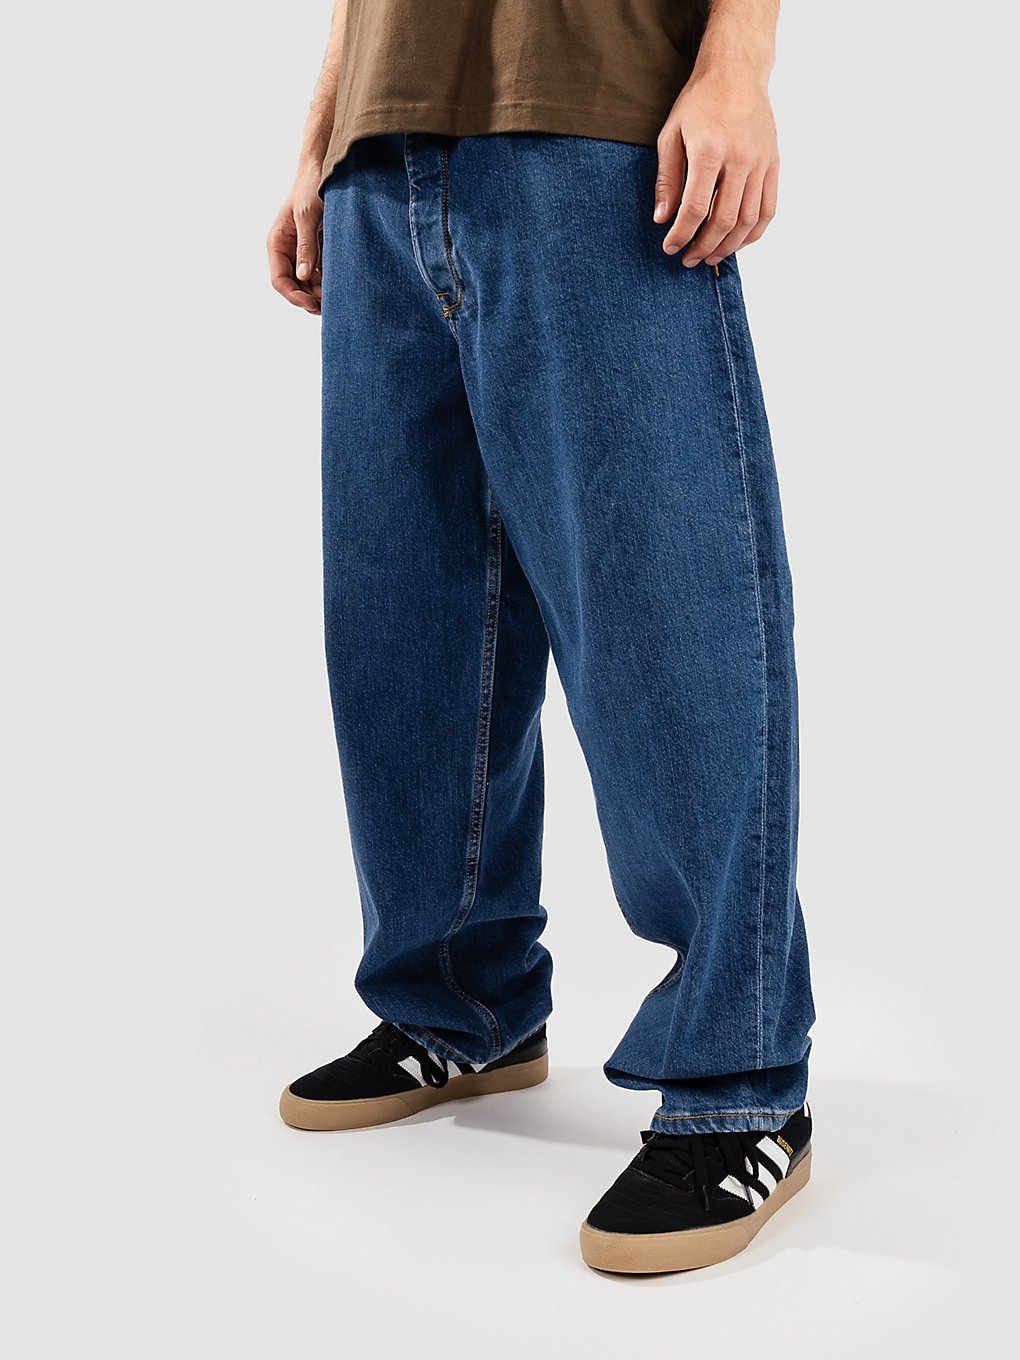 Homeboy X-Tra Monster Jeans blauw